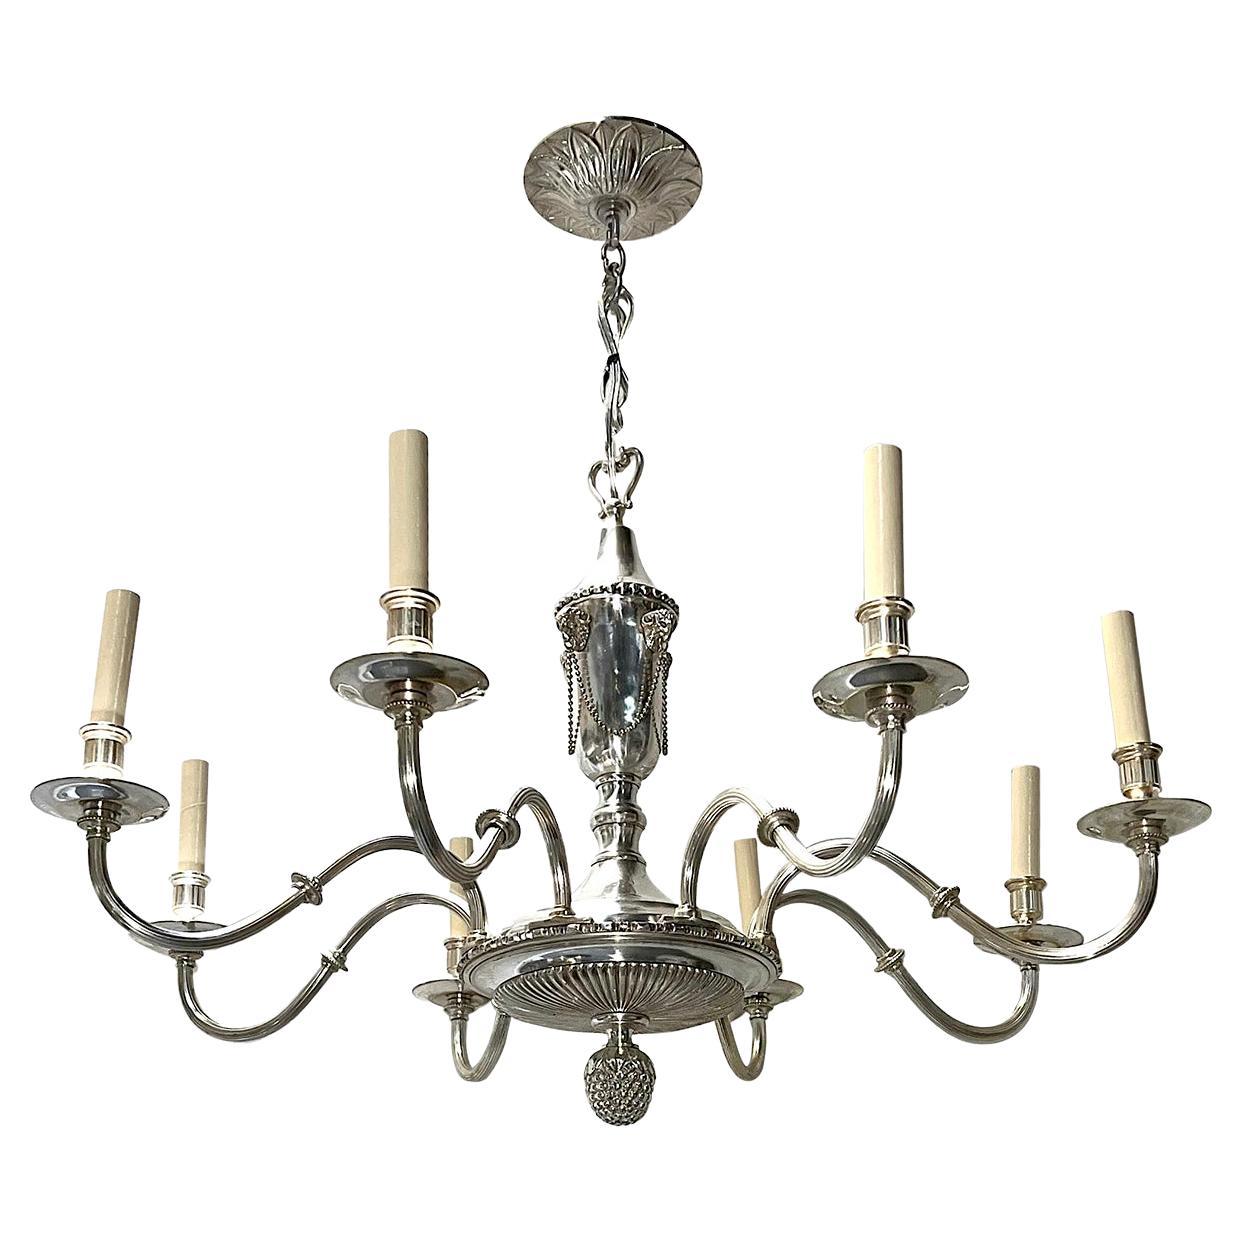 Antique Neoclassic Silver Plated Chandelier For Sale